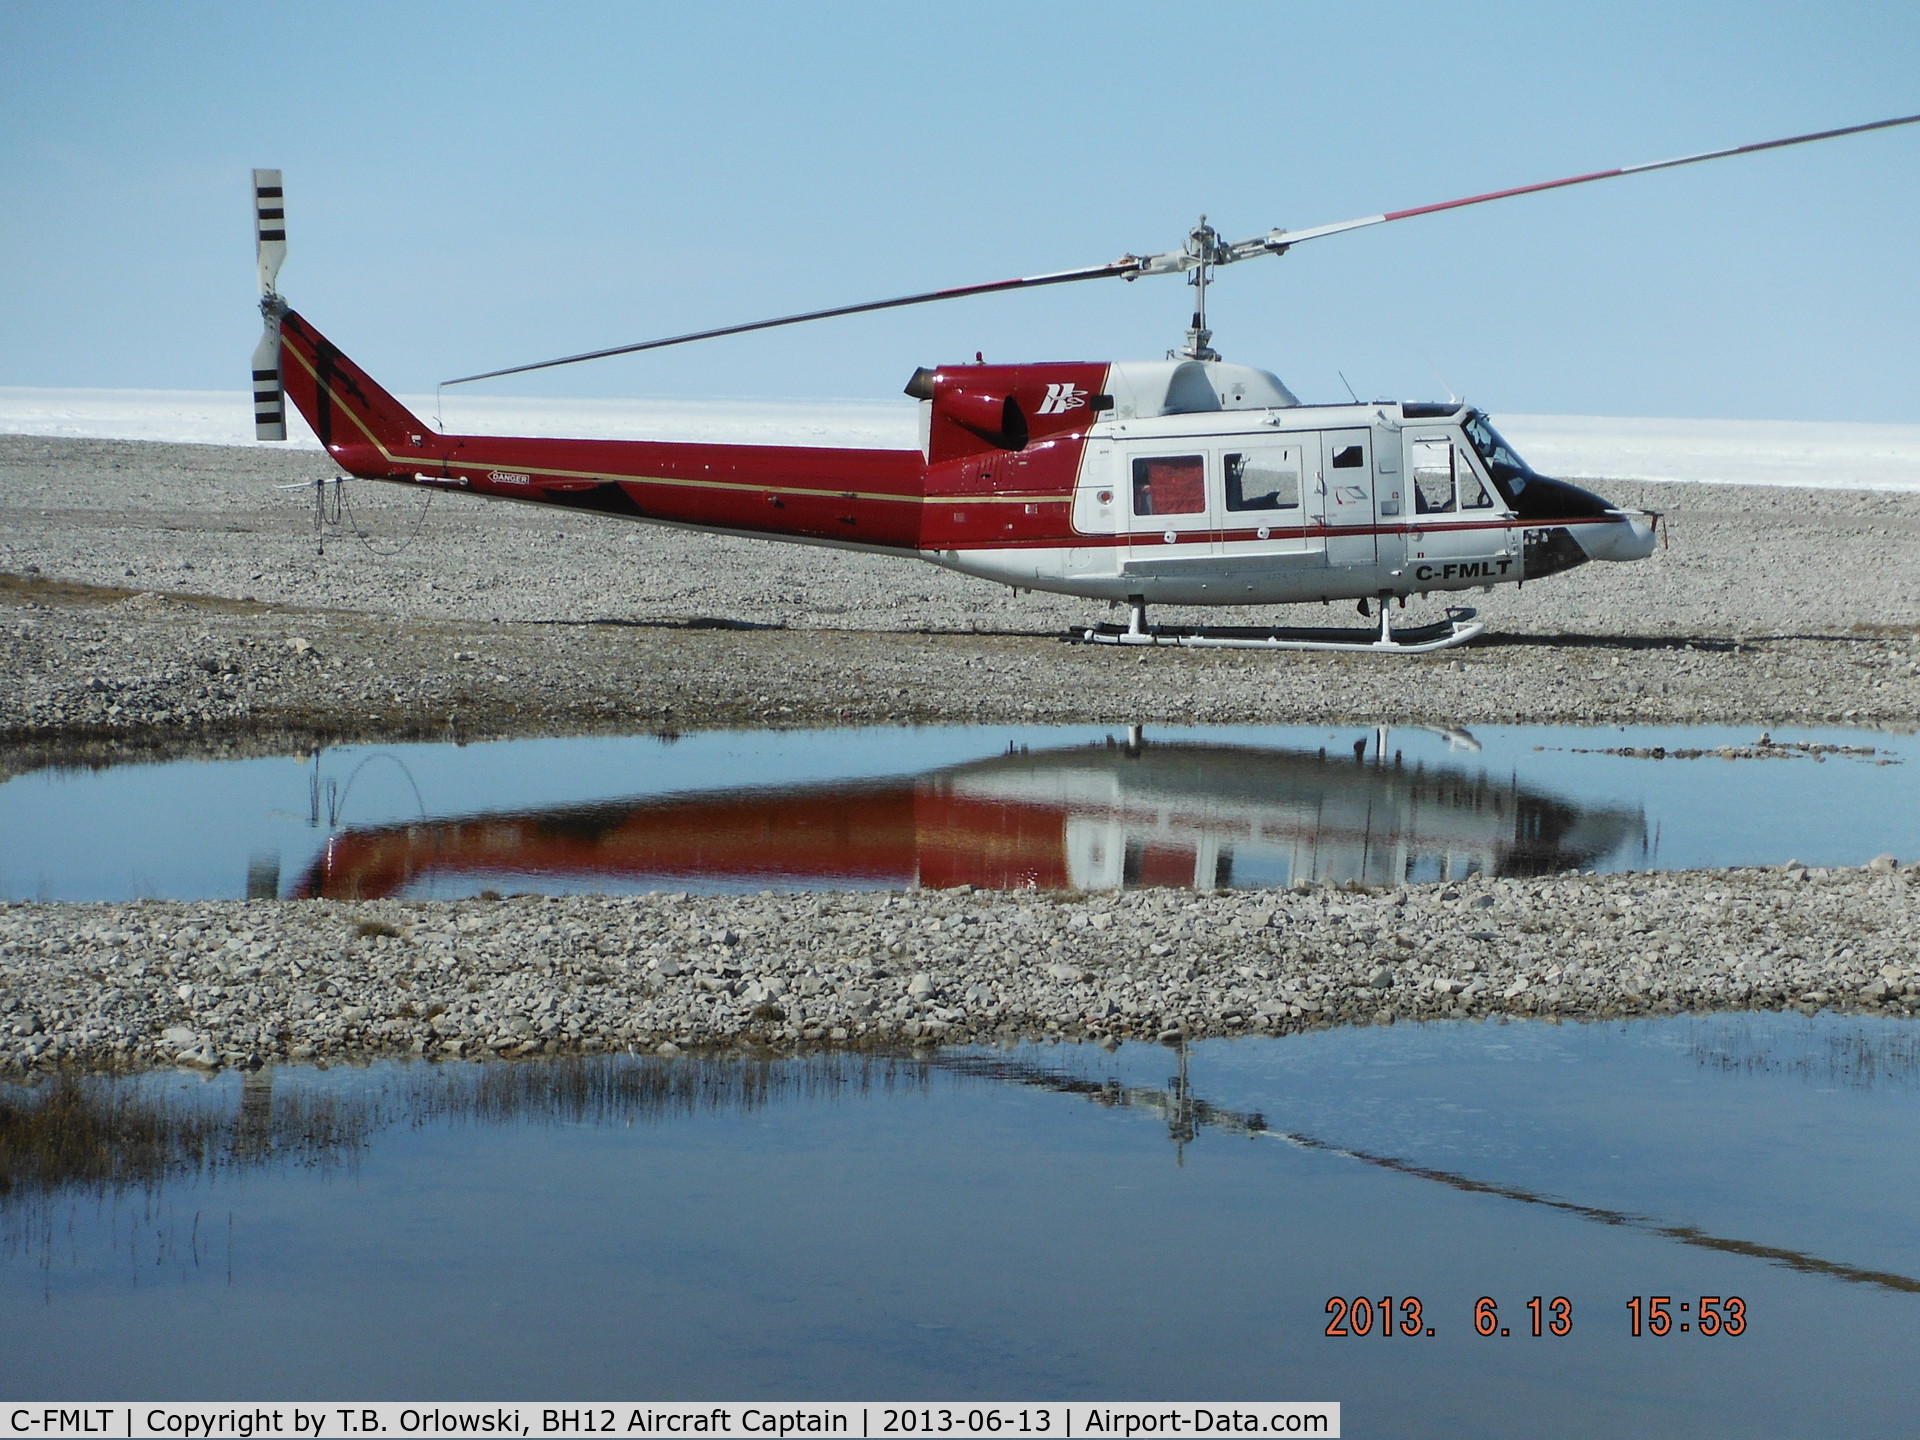 C-FMLT, 1978 Bell 212 C/N 30889, Harding River, Nunavut, Canada (North West Passage) near the beach tanks.  C-FMLT is based in Cambridge Bay (CYCB): it is one of the HTSC helicopters currently contracted for flight operations in support of the North Warning System (NWS).